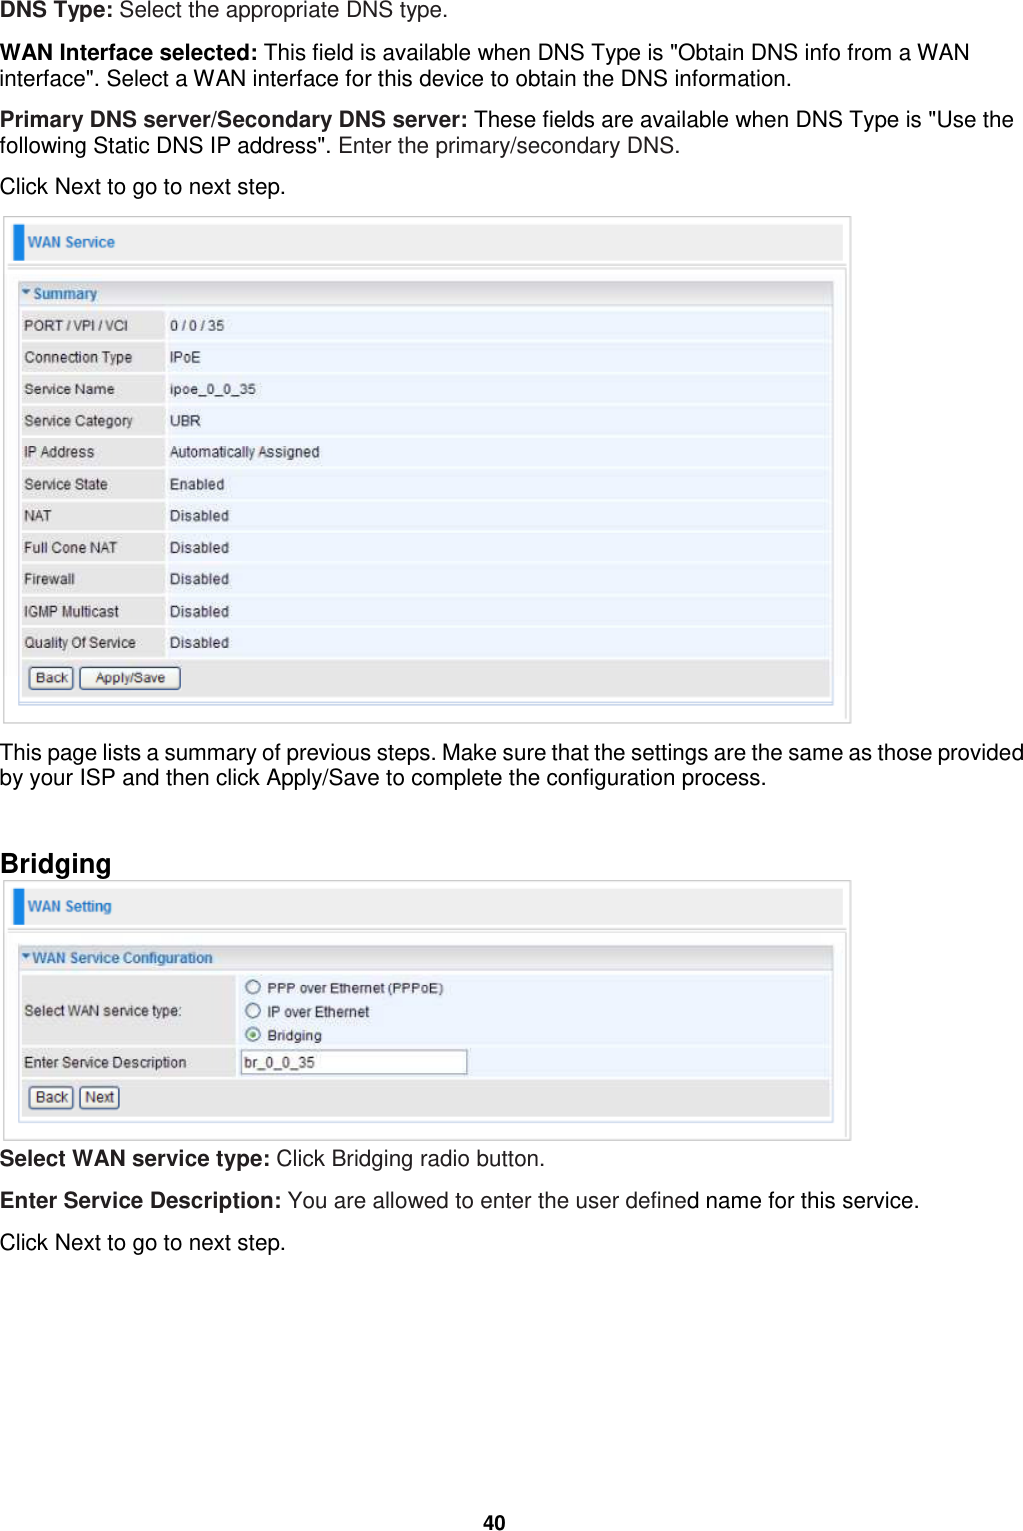  40 DNS Type: Select the appropriate DNS type.  WAN Interface selected: This field is available when DNS Type is &quot;Obtain DNS info from a WAN interface&quot;. Select a WAN interface for this device to obtain the DNS information. Primary DNS server/Secondary DNS server: These fields are available when DNS Type is &quot;Use the following Static DNS IP address&quot;. Enter the primary/secondary DNS. Click Next to go to next step.  This page lists a summary of previous steps. Make sure that the settings are the same as those provided by your ISP and then click Apply/Save to complete the configuration process.   Bridging  Select WAN service type: Click Bridging radio button. Enter Service Description: You are allowed to enter the user defined name for this service. Click Next to go to next step. 